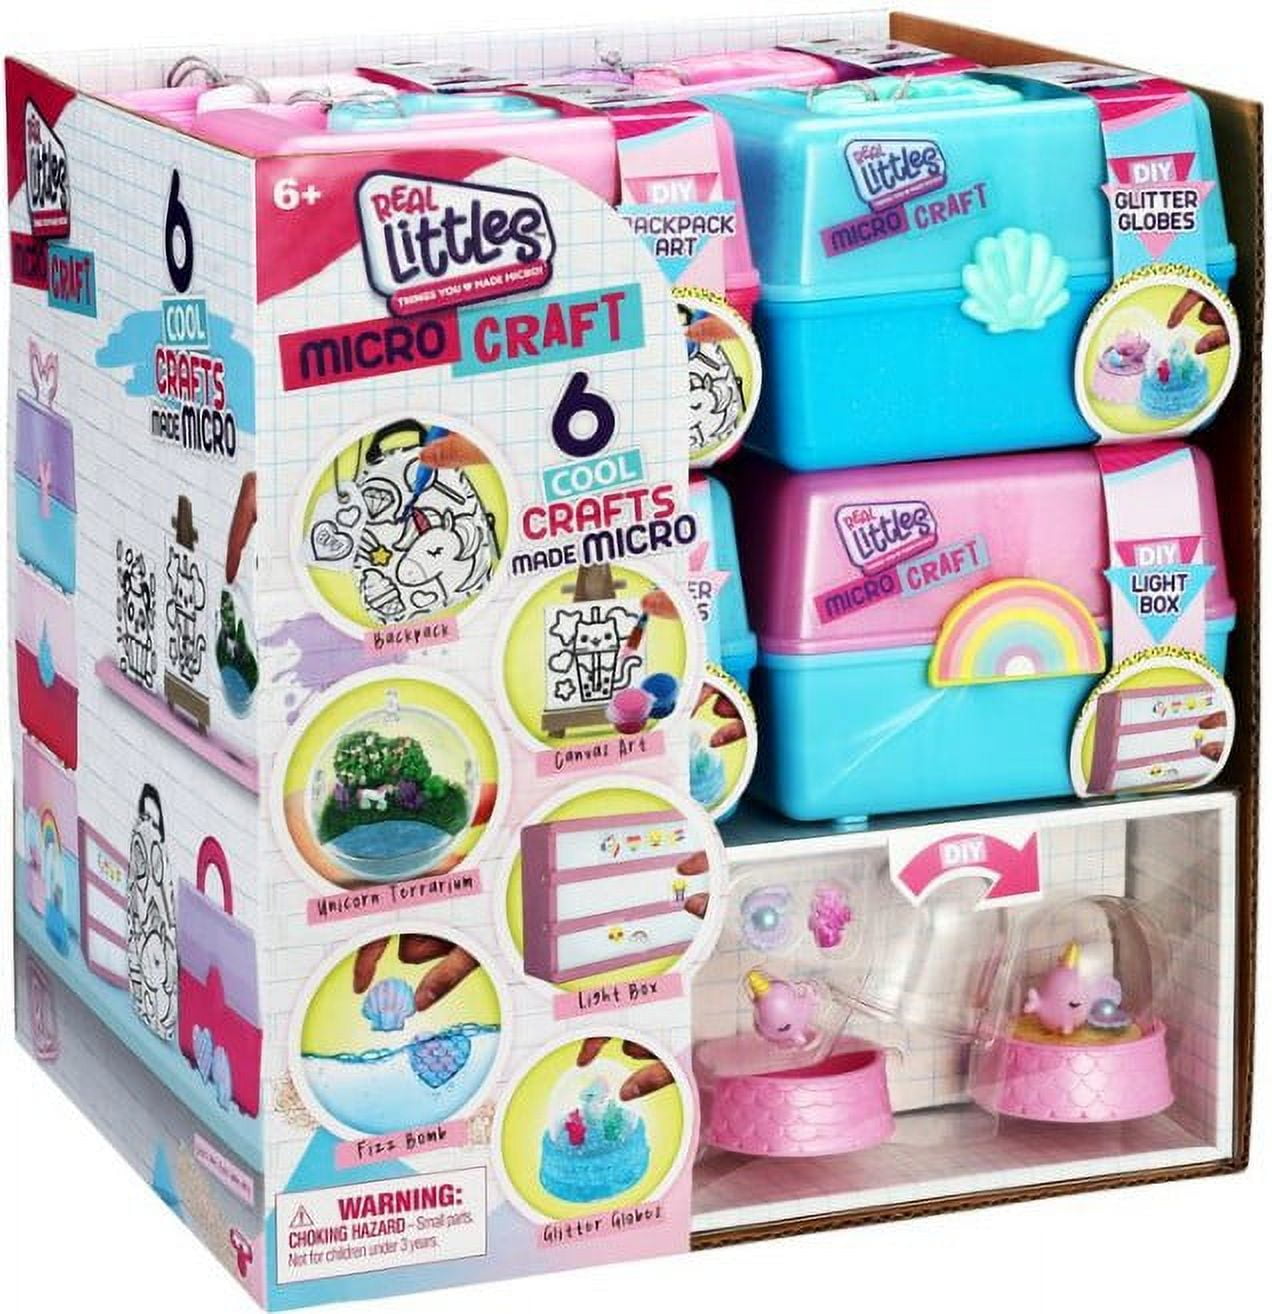 Shopkins Real Littles Handbags Series 3 Mystery Pack Moose Toys - ToyWiz